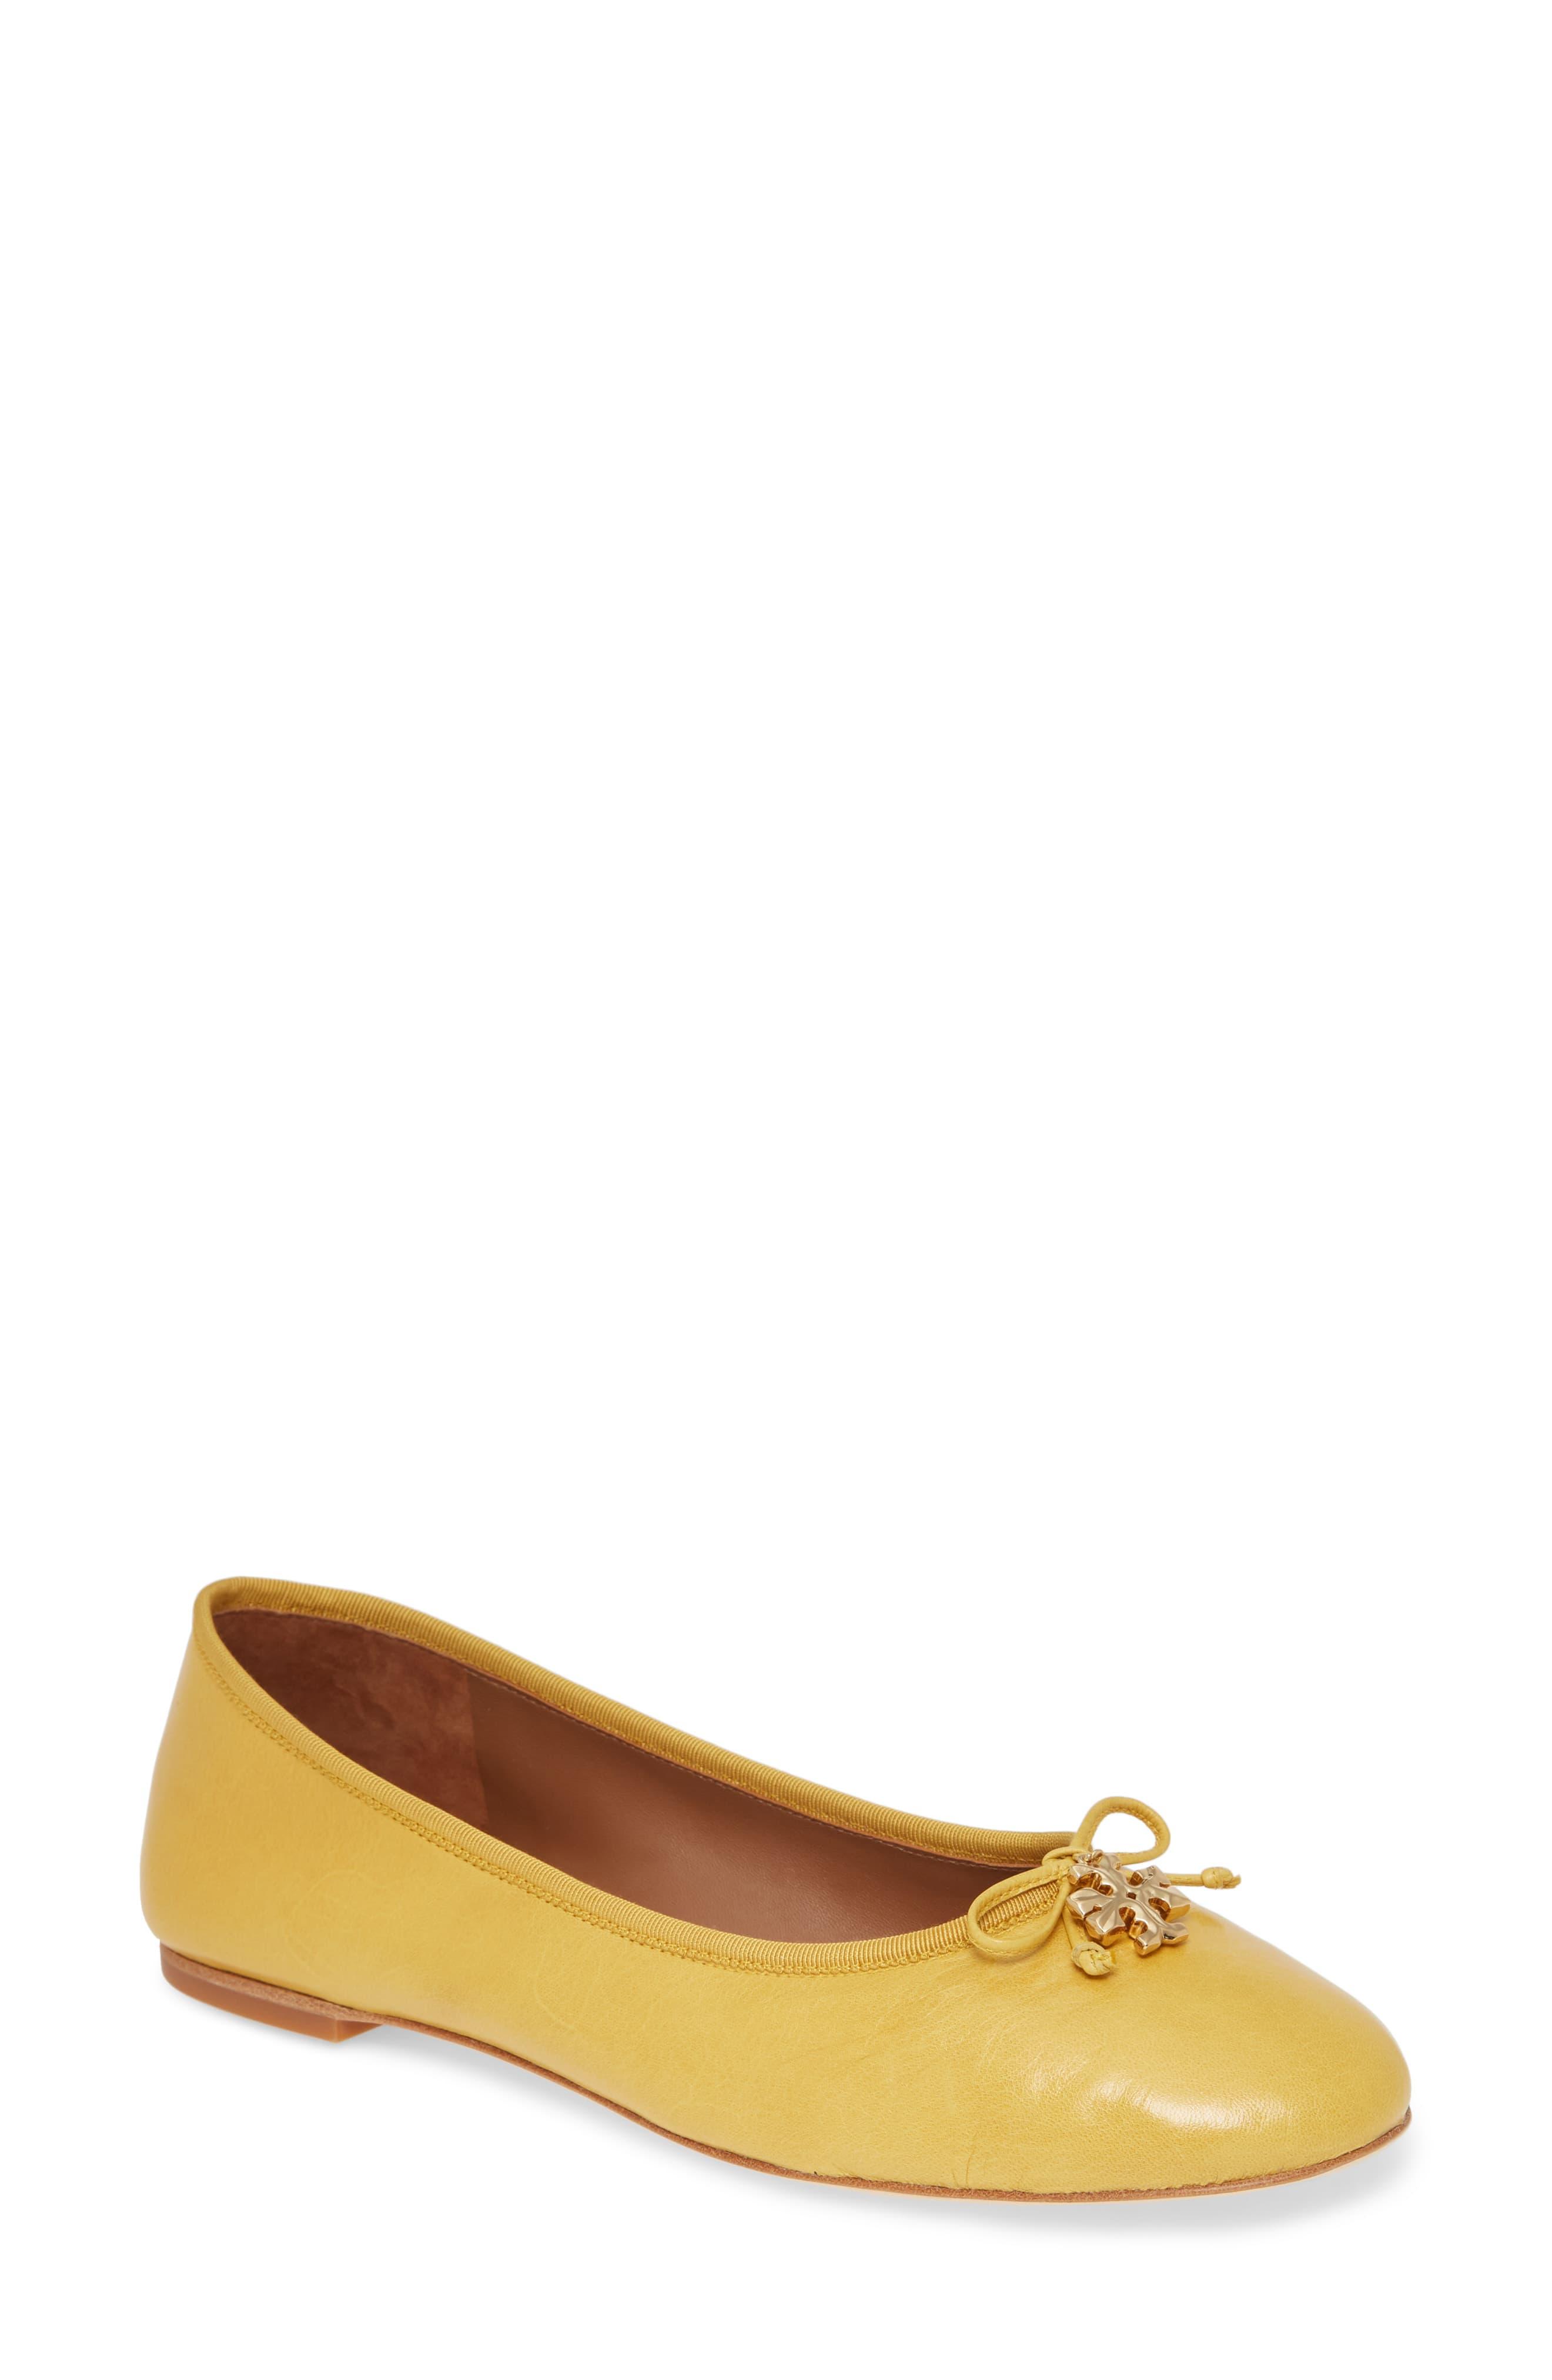 Tory Burch Leather Tory Charm Ballet Flat in Yellow - Lyst